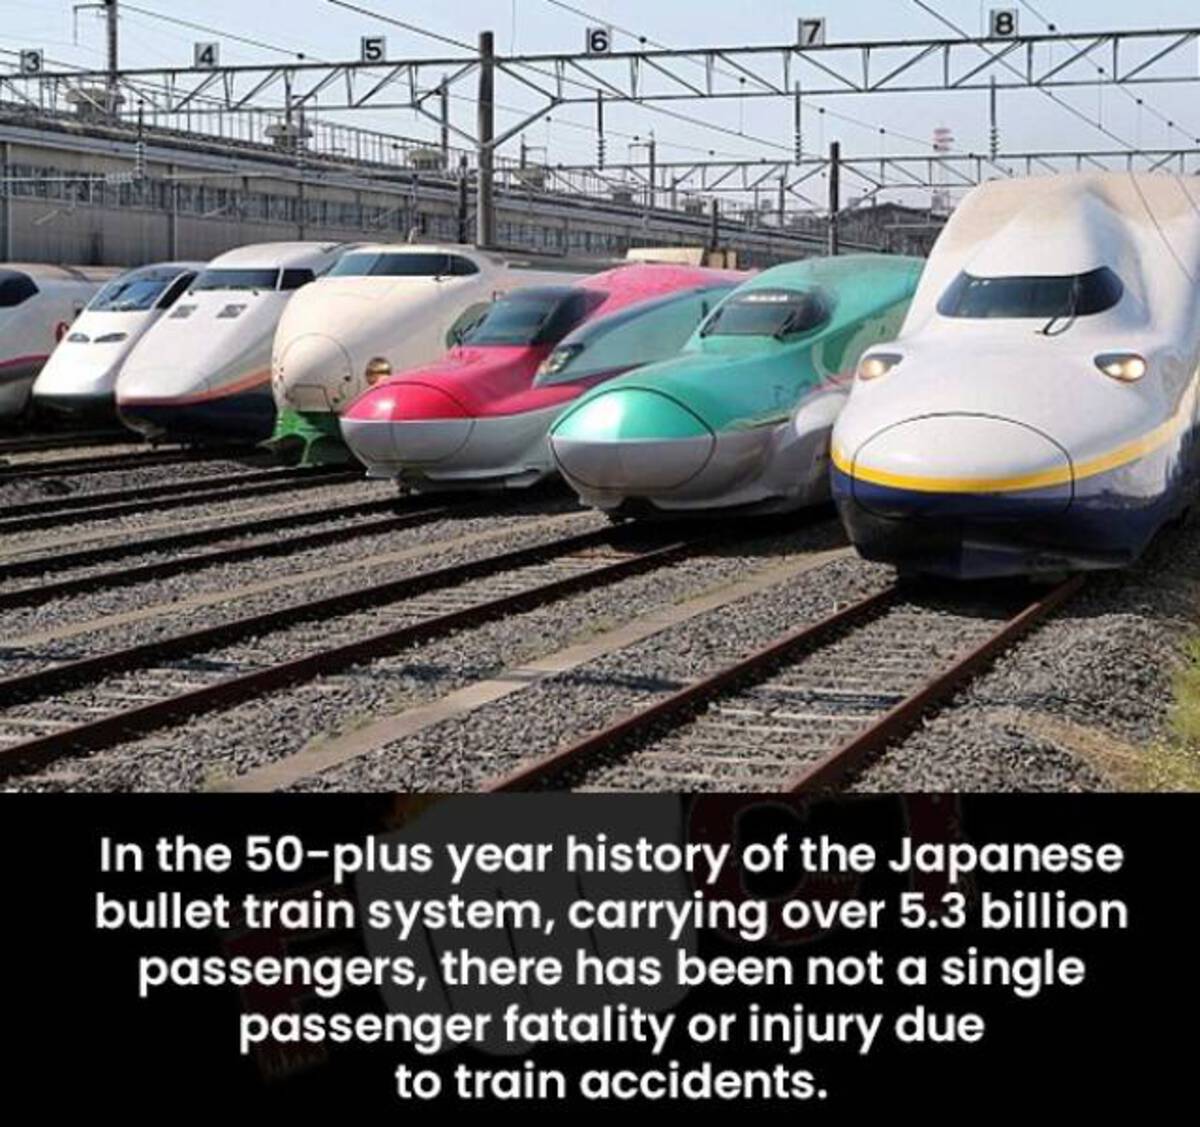 shinkansen e5 e6 - In the 50plus year history of the Japanese bullet train system, carrying over 5.3 billion passengers, there has been not a single passenger fatality or injury due to train accidents.